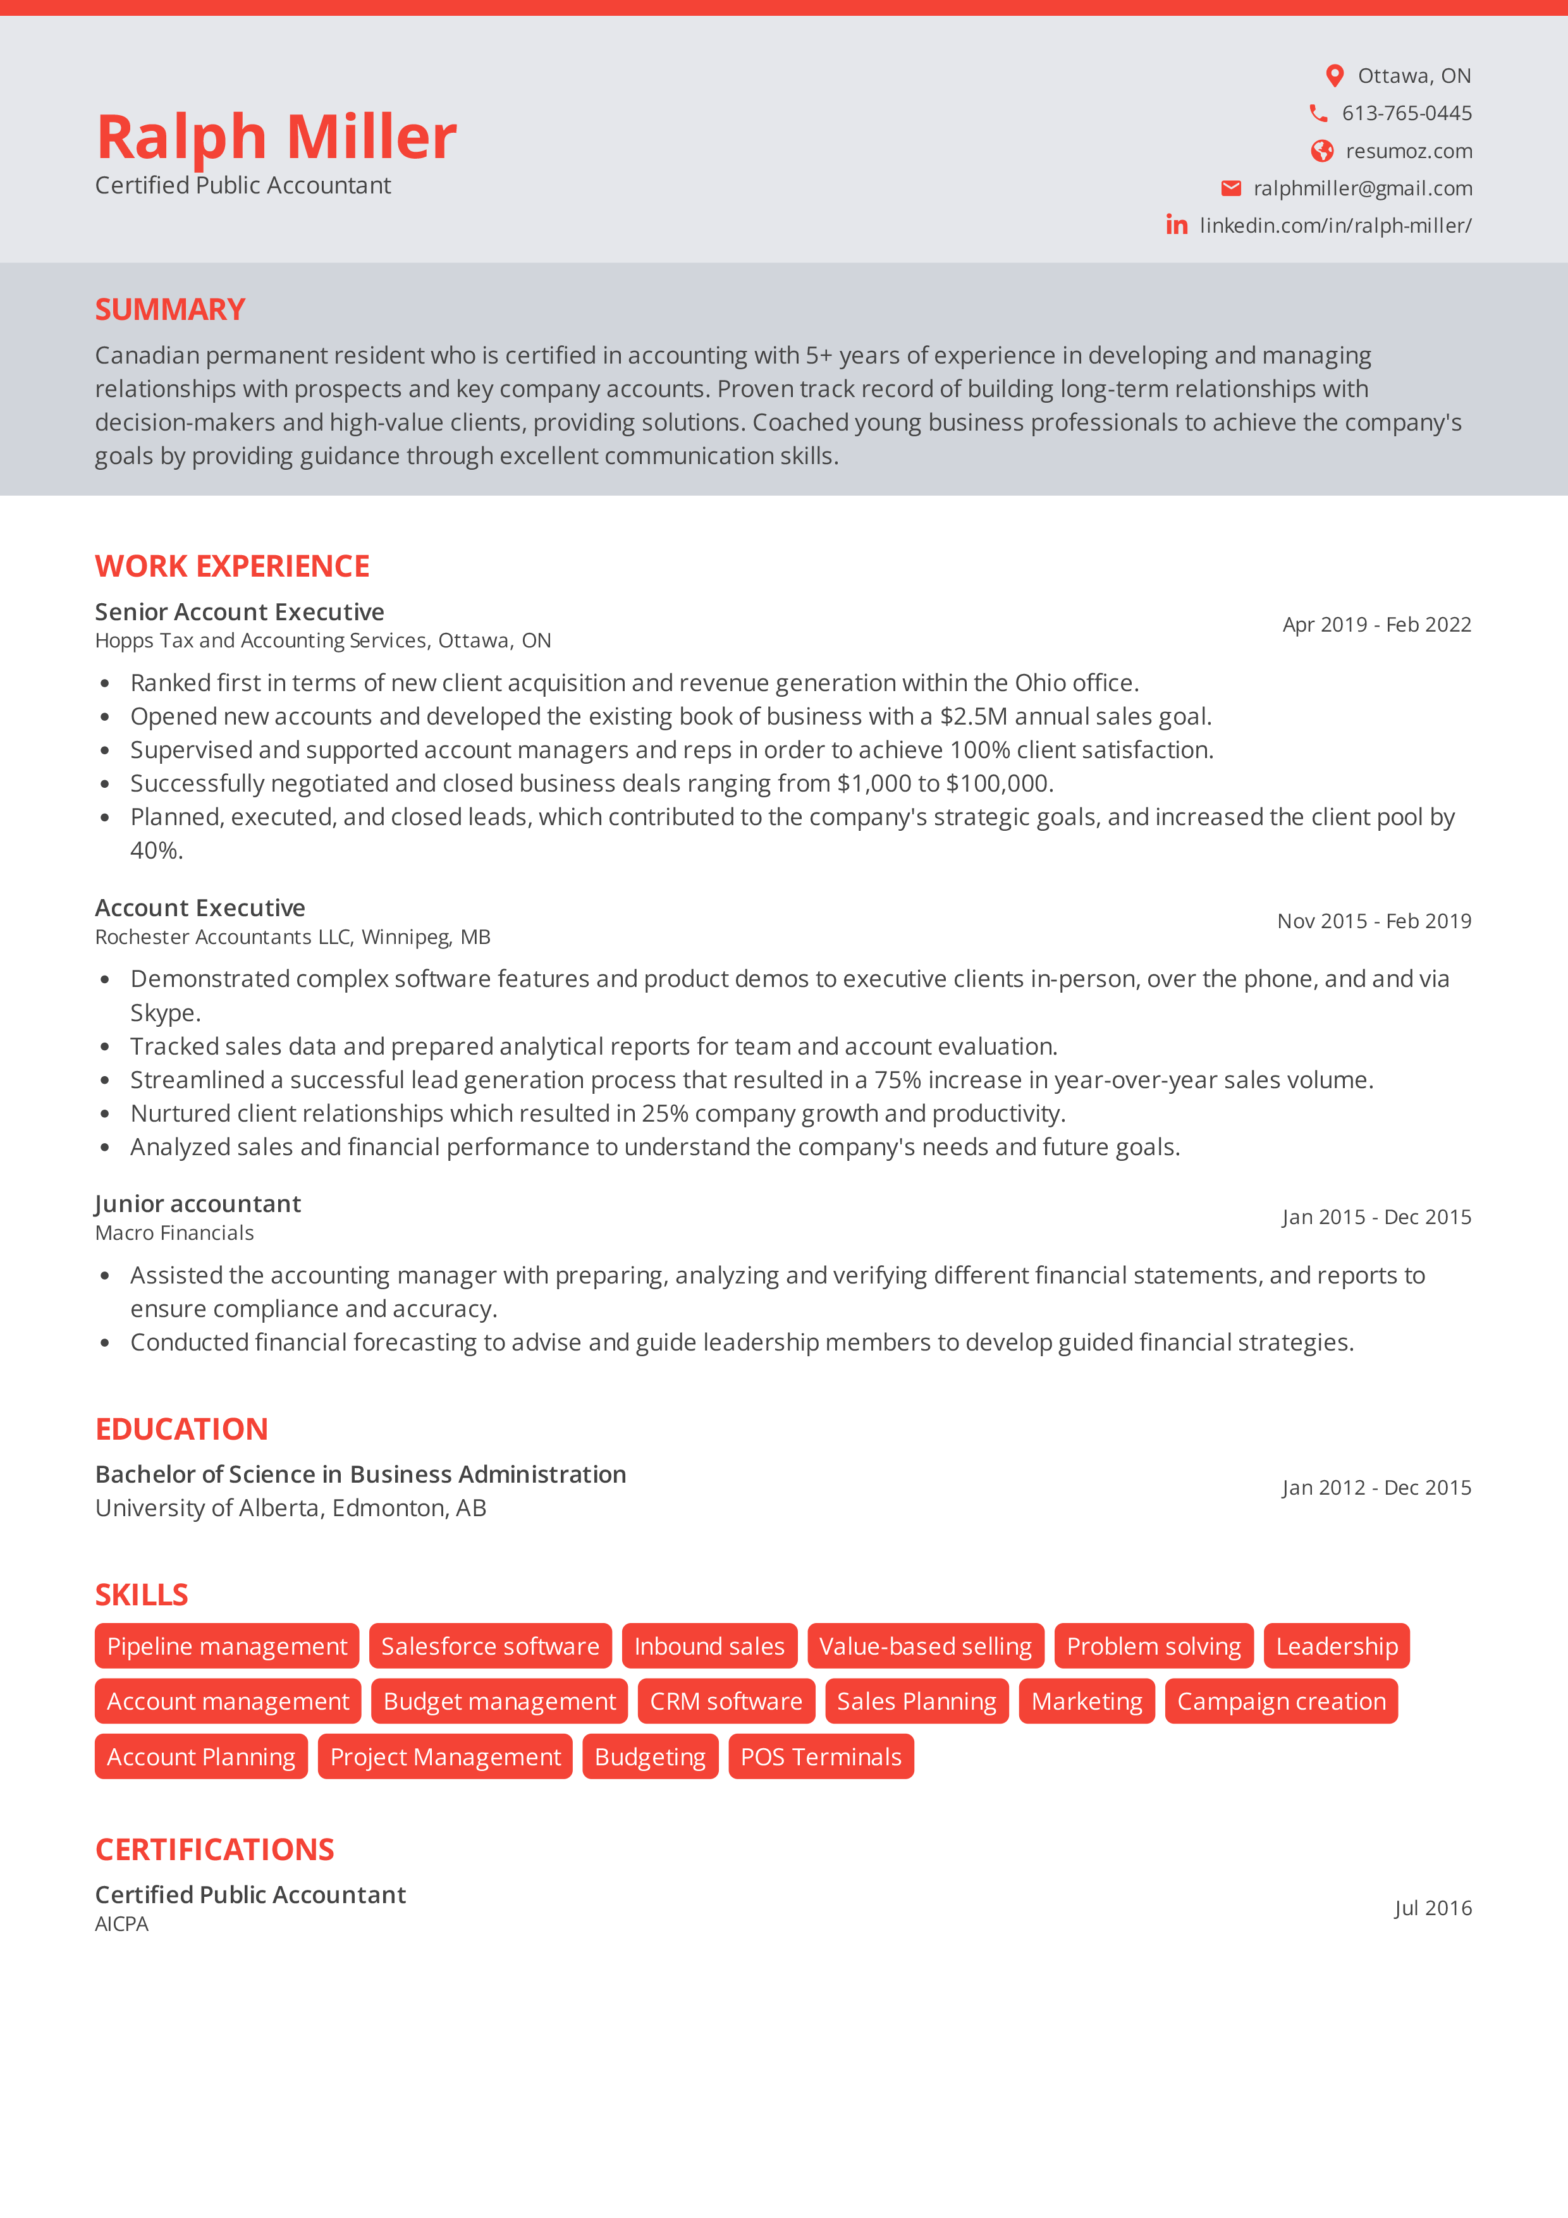 Canadian Resume Format for Foreigners Guide] Resumoz